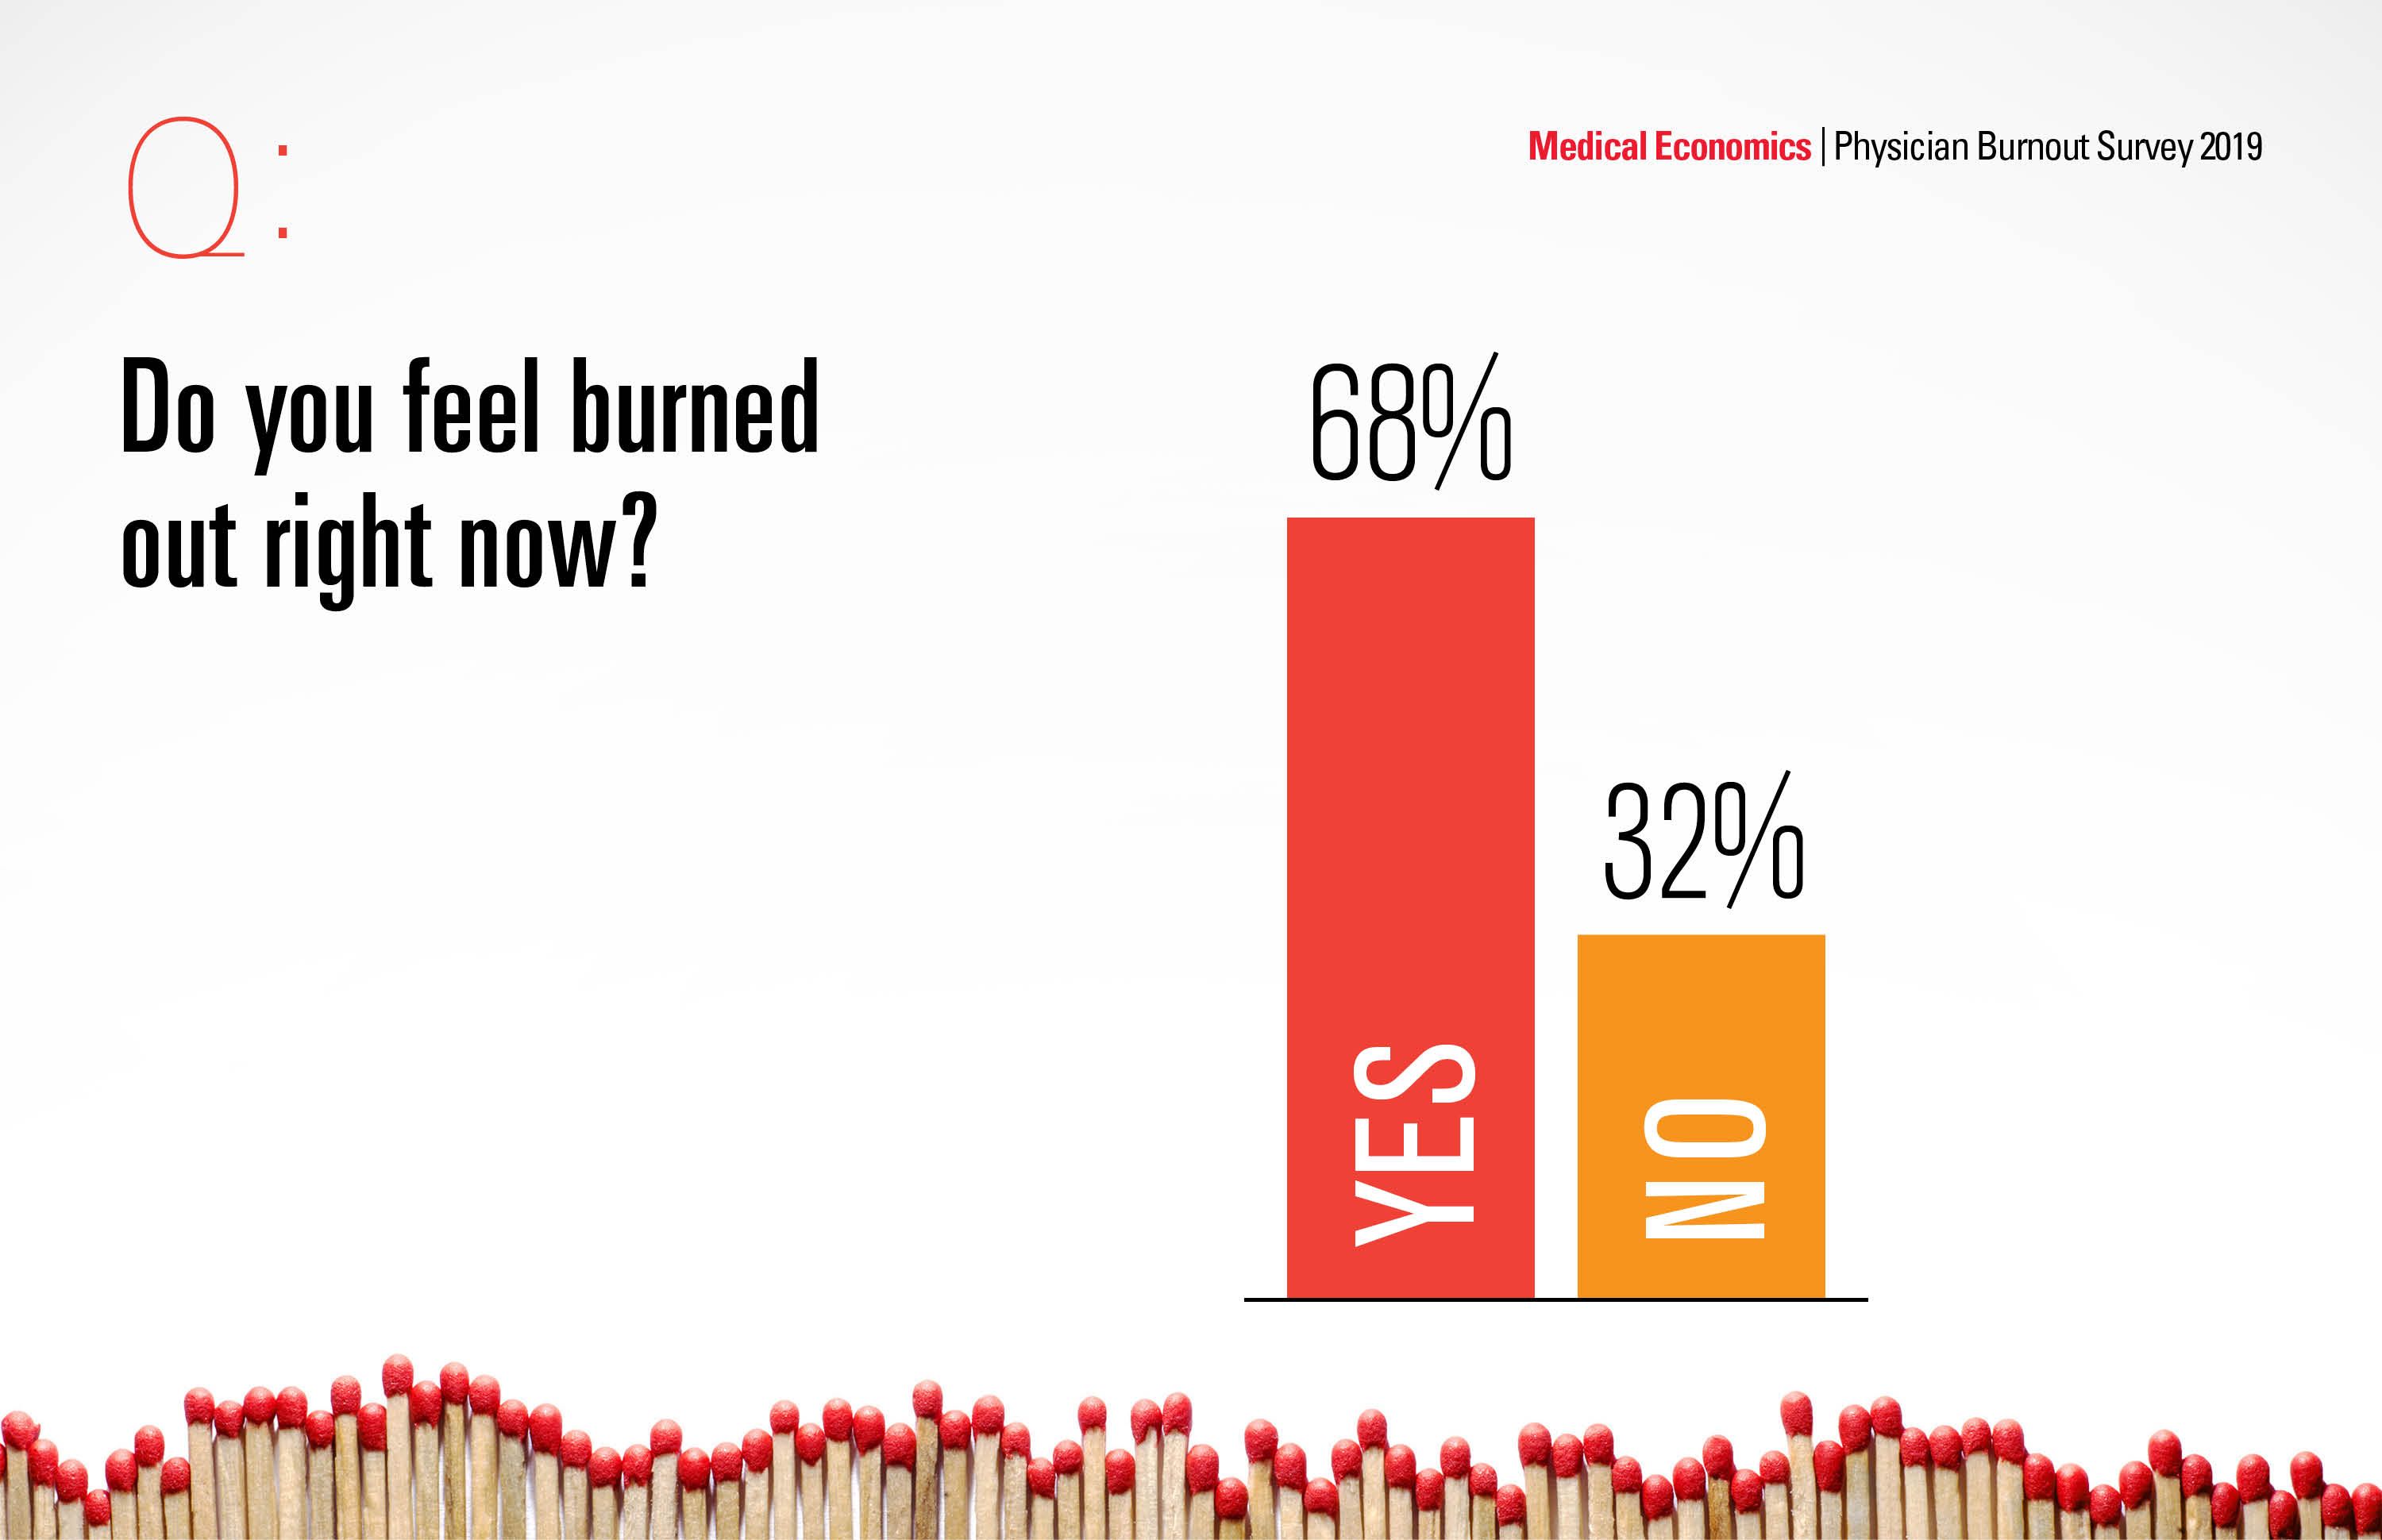 Do you feel burned out right now?